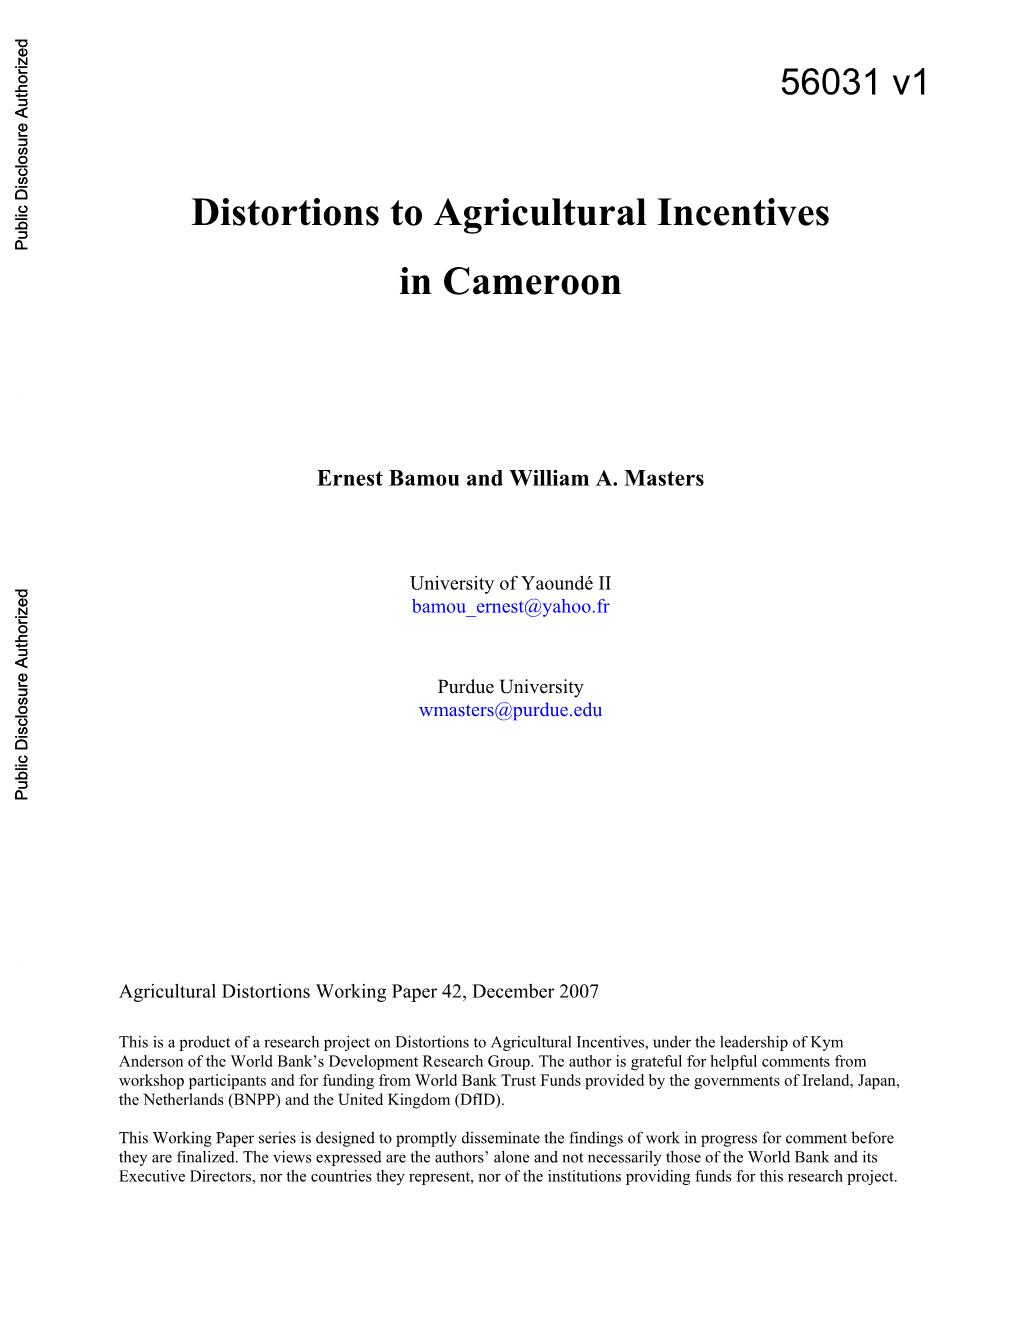 Distortions to Agricultural Incentives in Cameroon